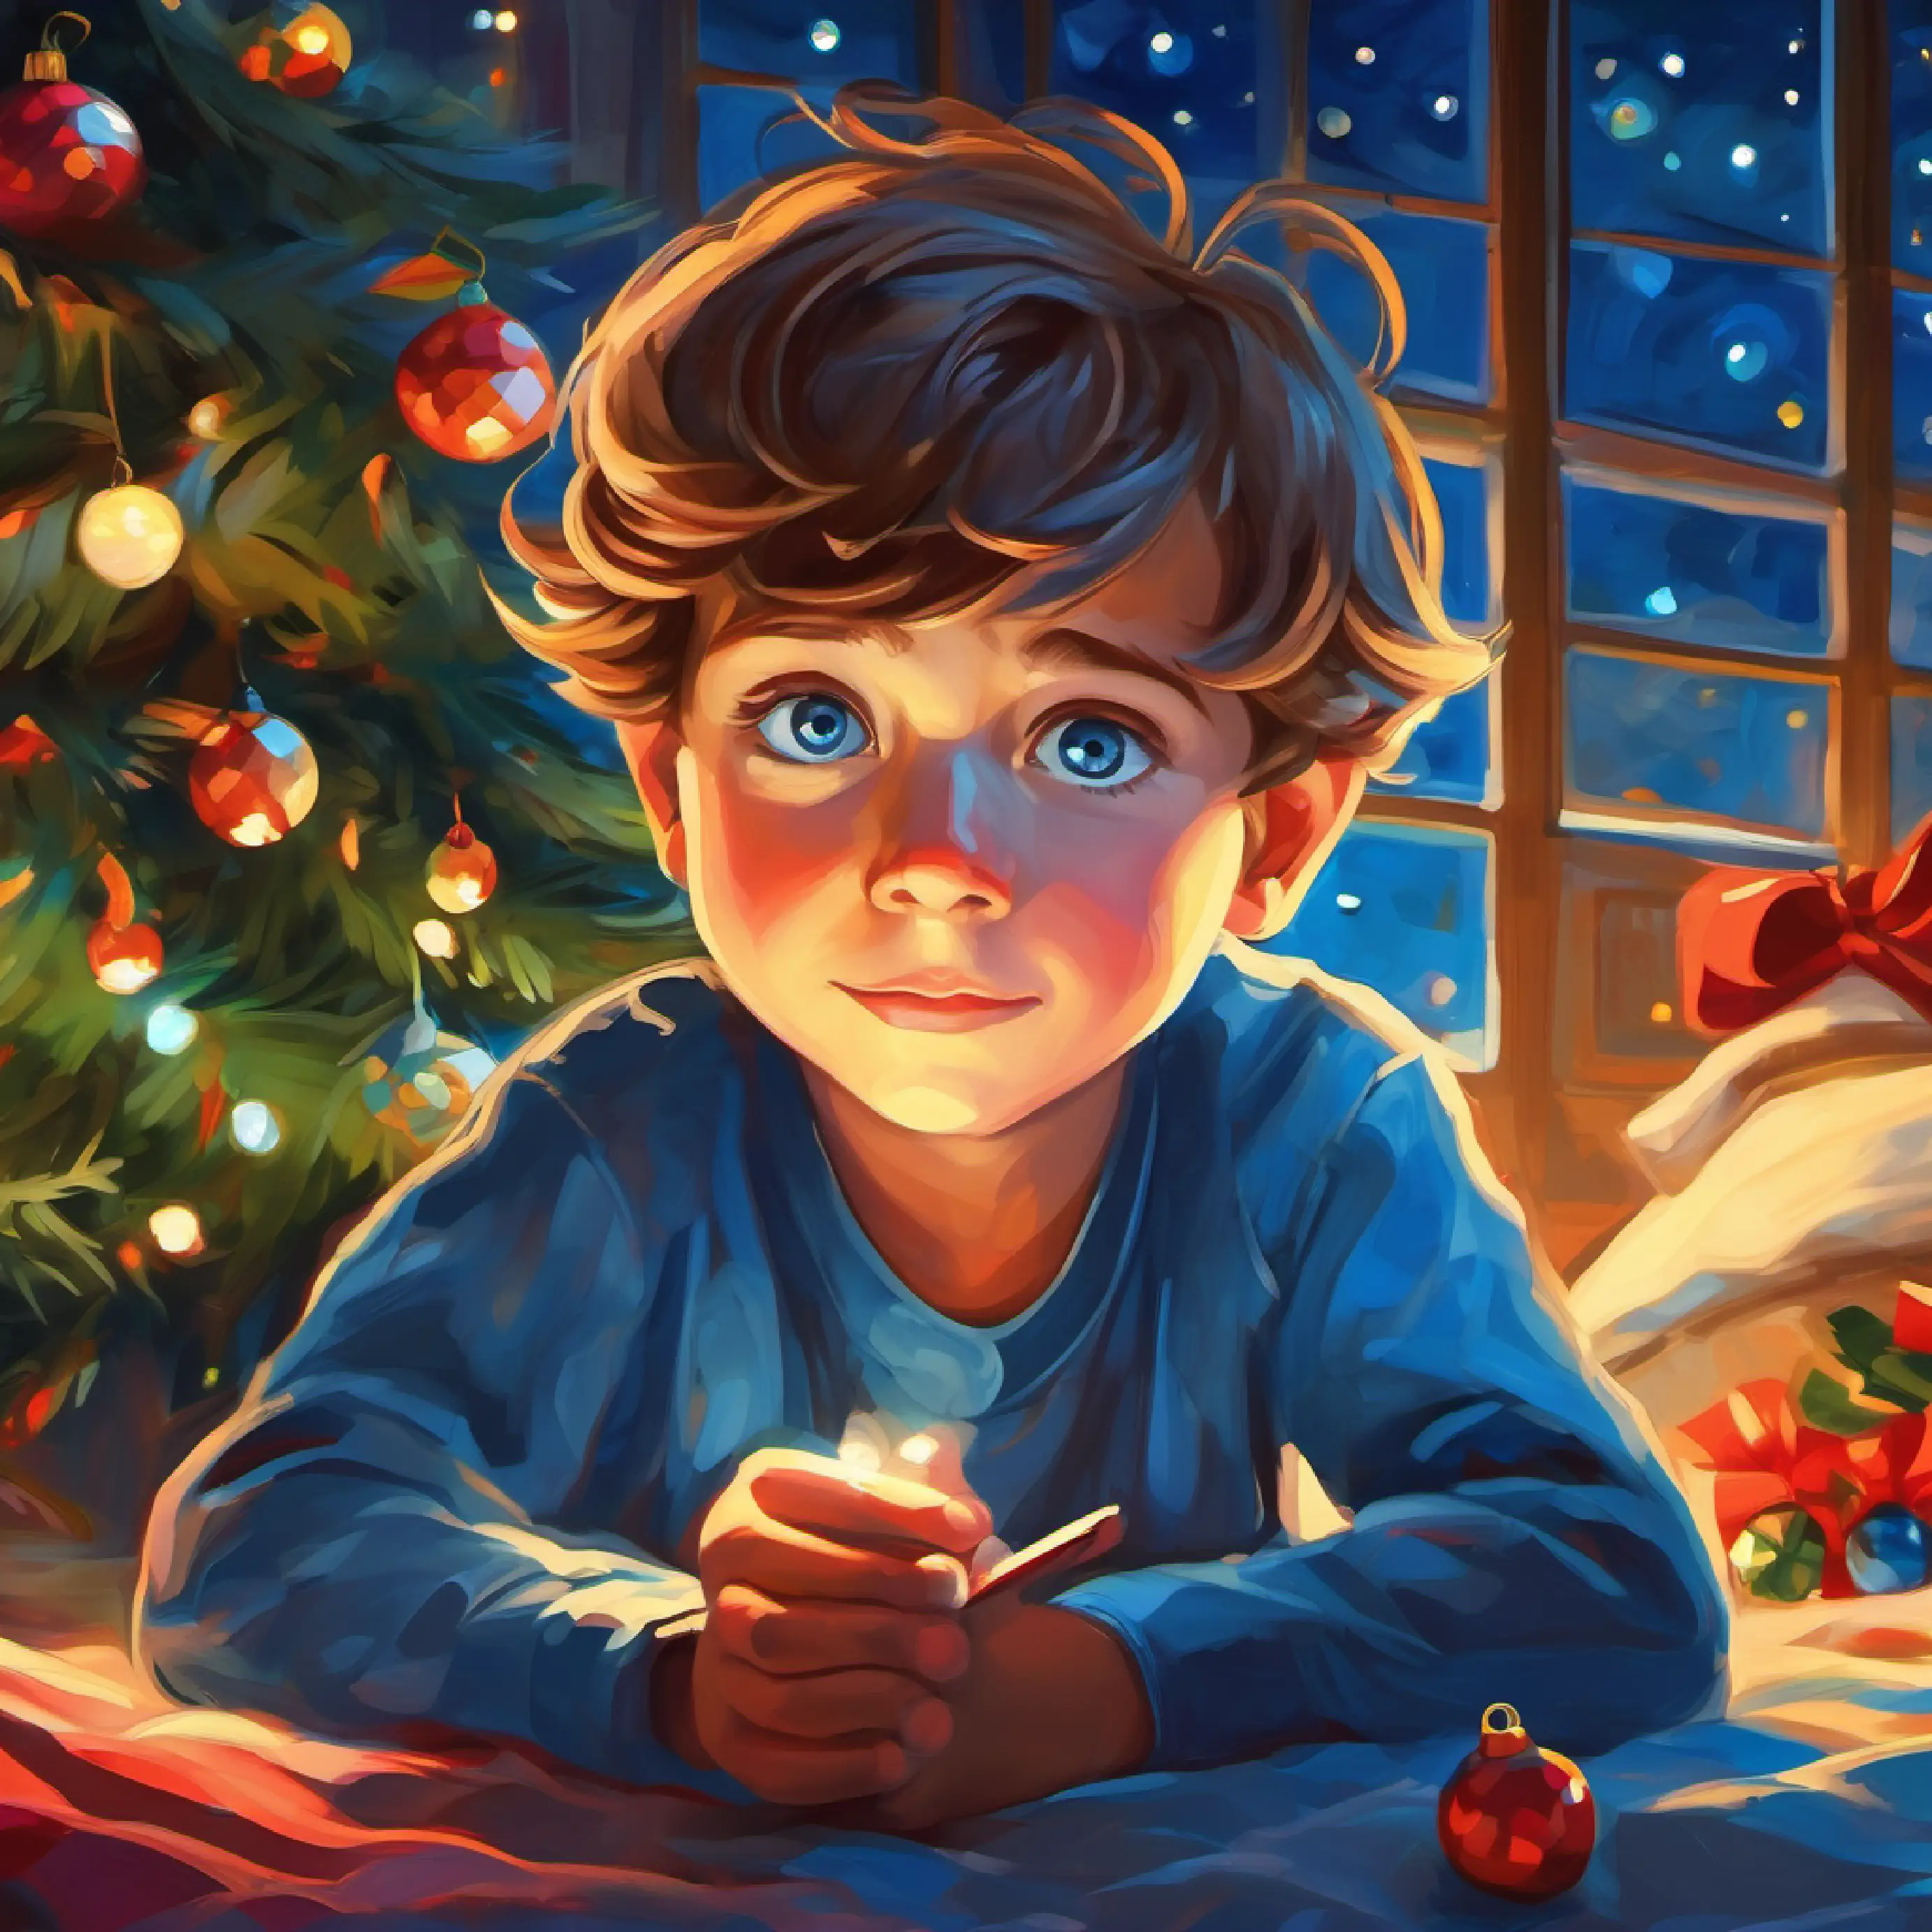 Young boy with bright blue eyes, spirited and imaginative reflects on trust and friendship before bedtime